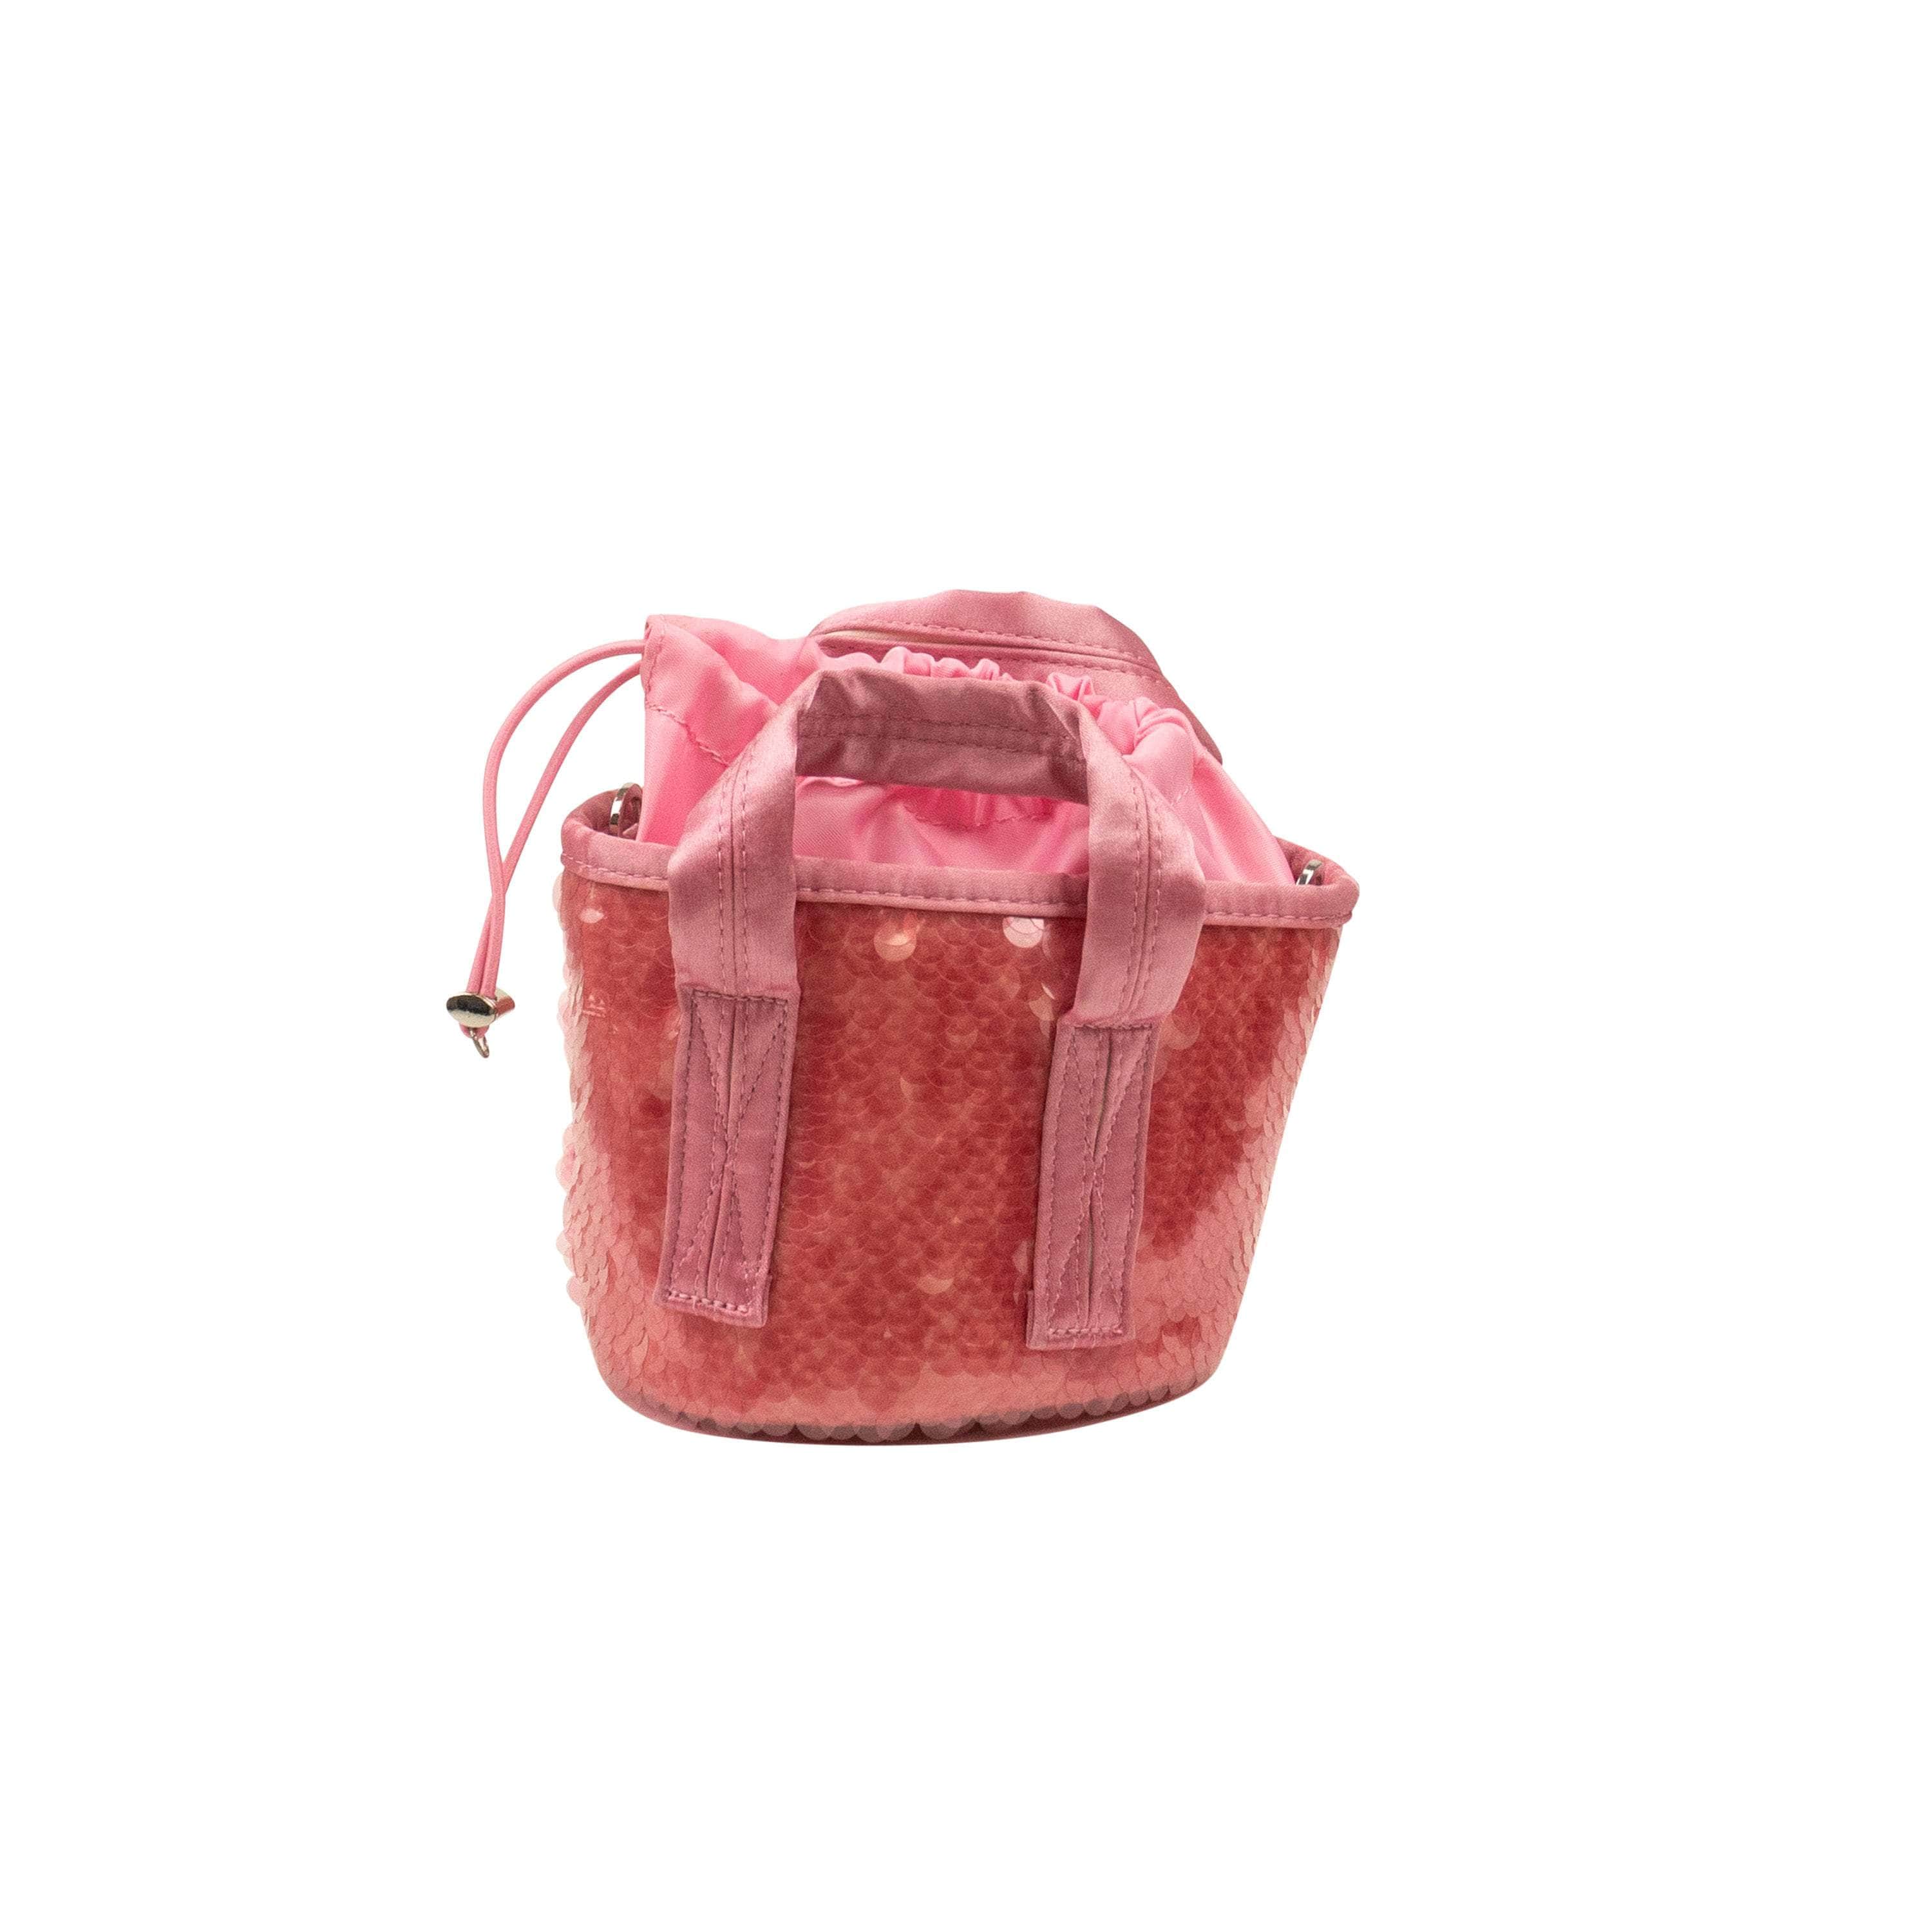 Opening Ceremony channelenable-all, chicmi, couponcollection, gender-mens, gender-womens, main-handbags, mens-shoes, opening-ceremony, size-os, under-250, unisex-bags OS French Rose Sequined Mini Bucket Bag 95-OCY-3043/OS 95-OCY-3043/OS